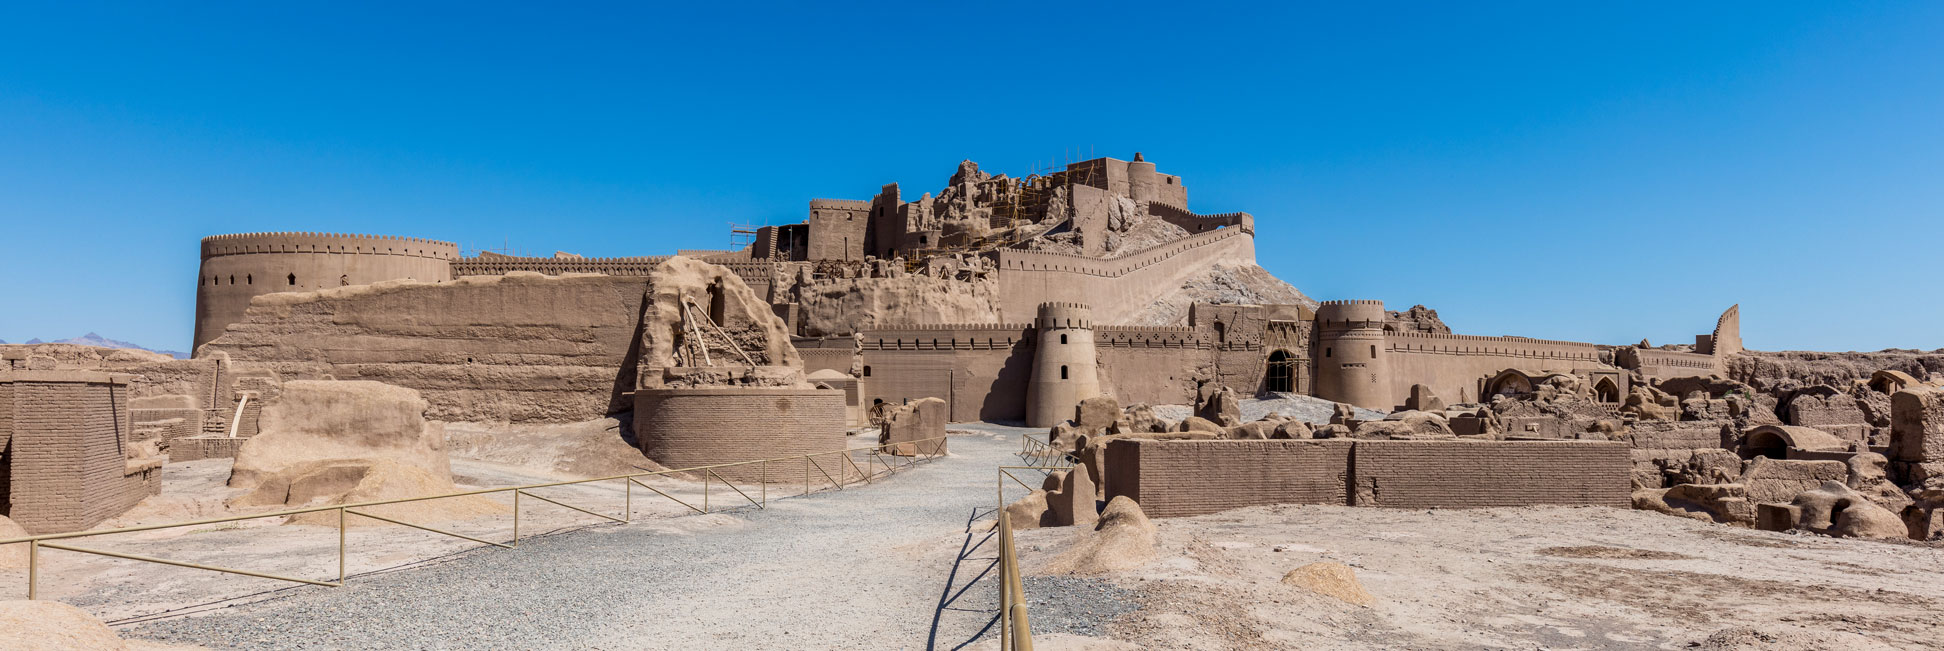 Arg-e Bam fortress in the city of Bam in Kerman Province, Iran